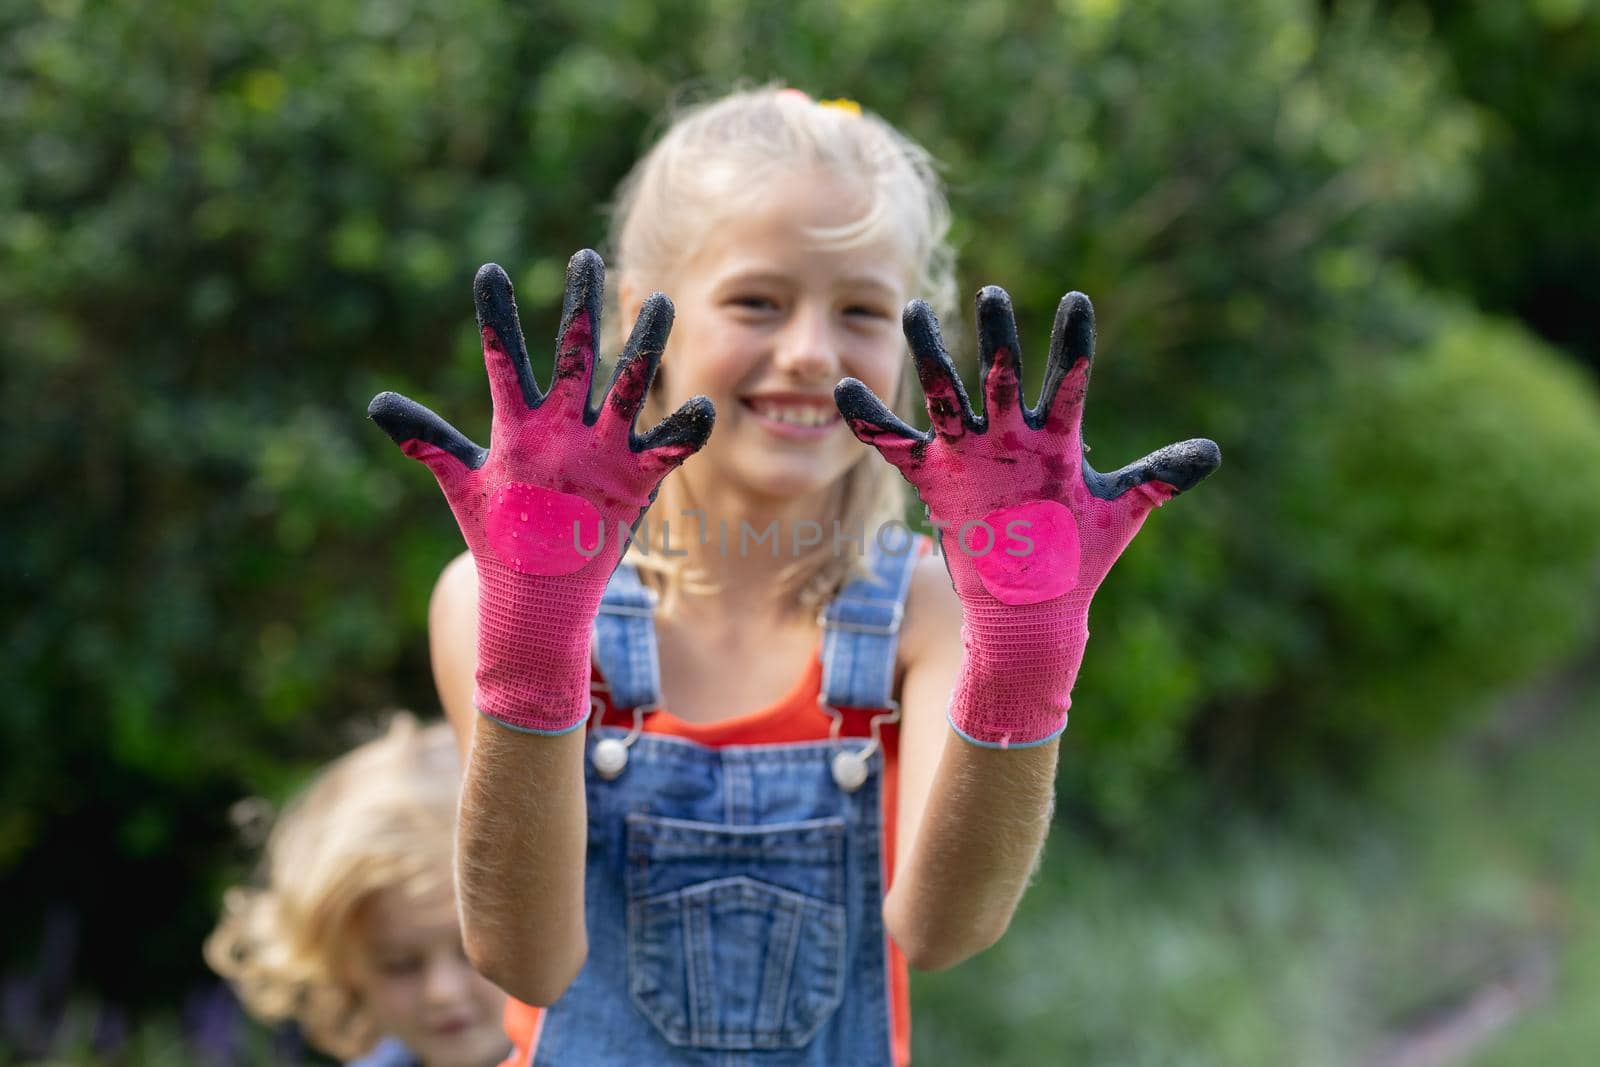 Smiling caucasian girl in garden wearing dirty pink gardening gloves, with brother in background by Wavebreakmedia